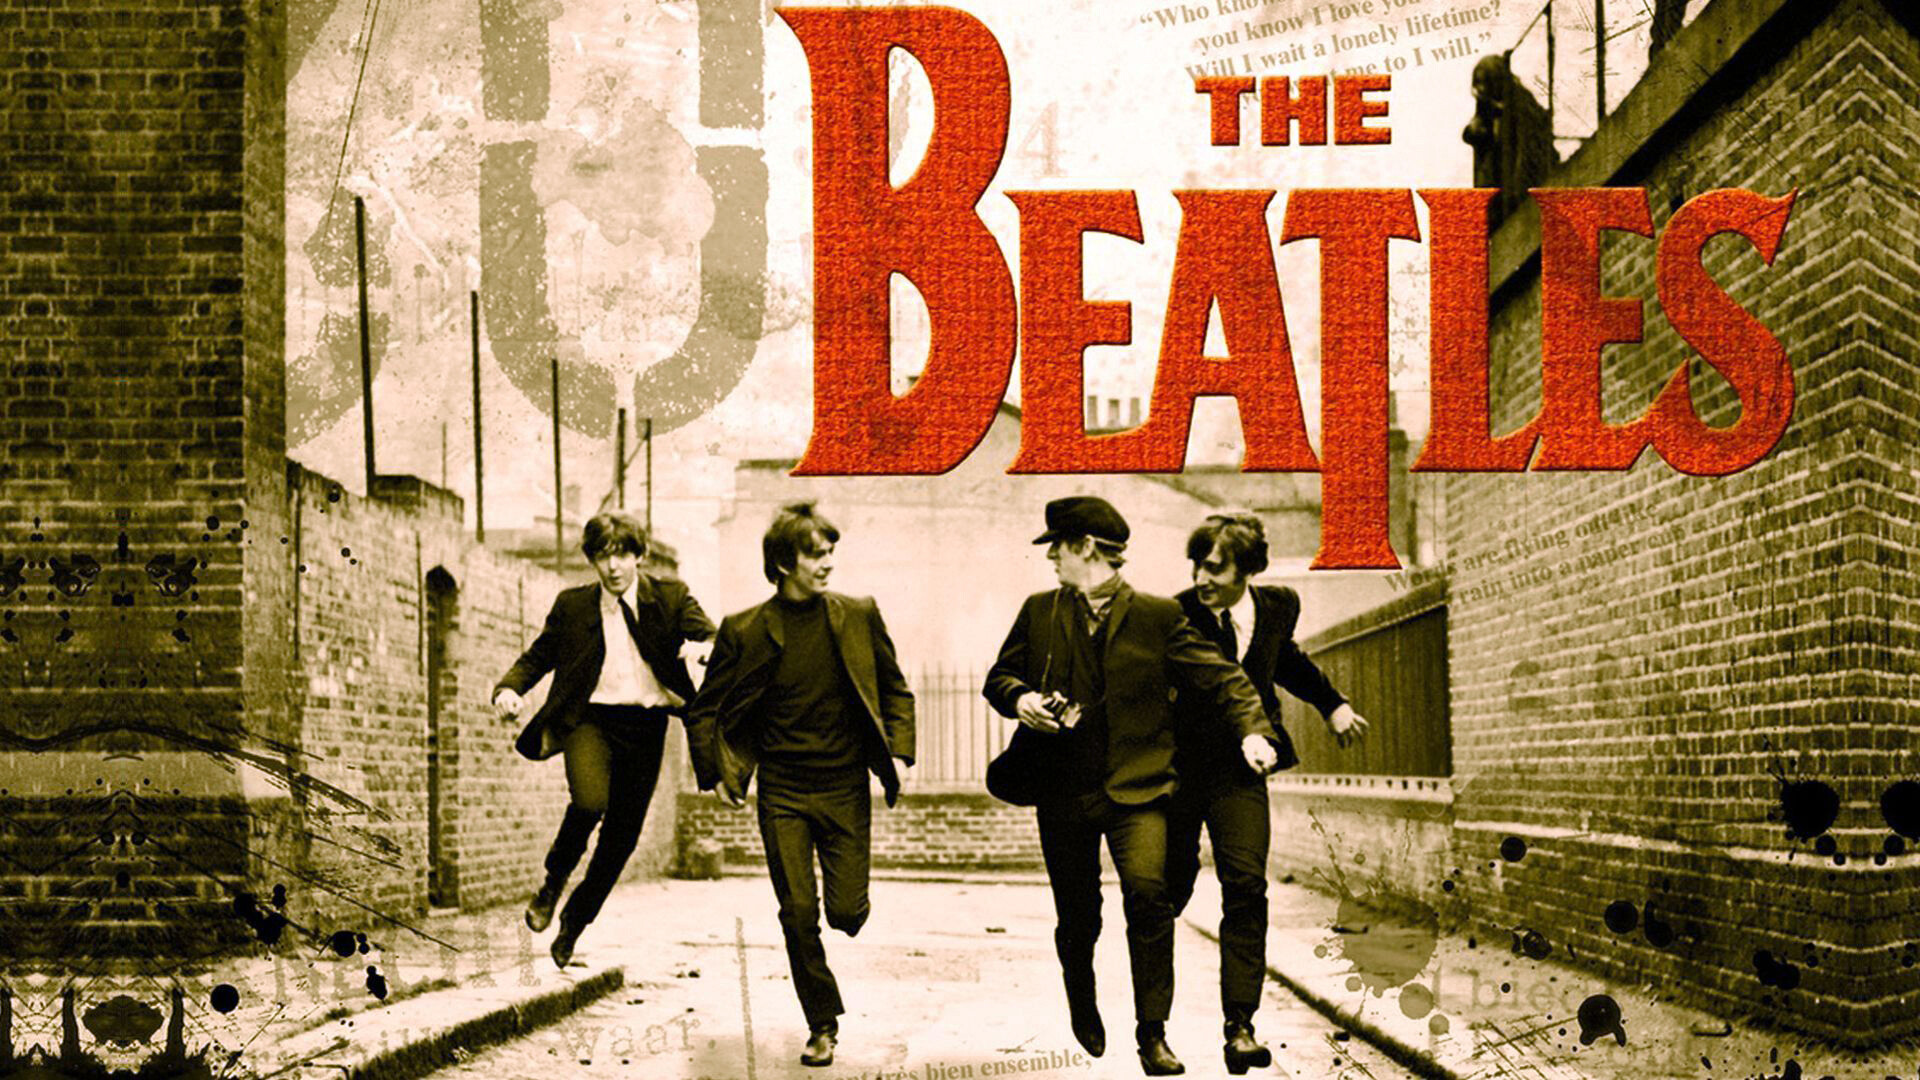 The Beatles: The band's concert at San Francisco's Candlestick Park on 29 August was their last commercial concert. 1920x1080 Full HD Background.